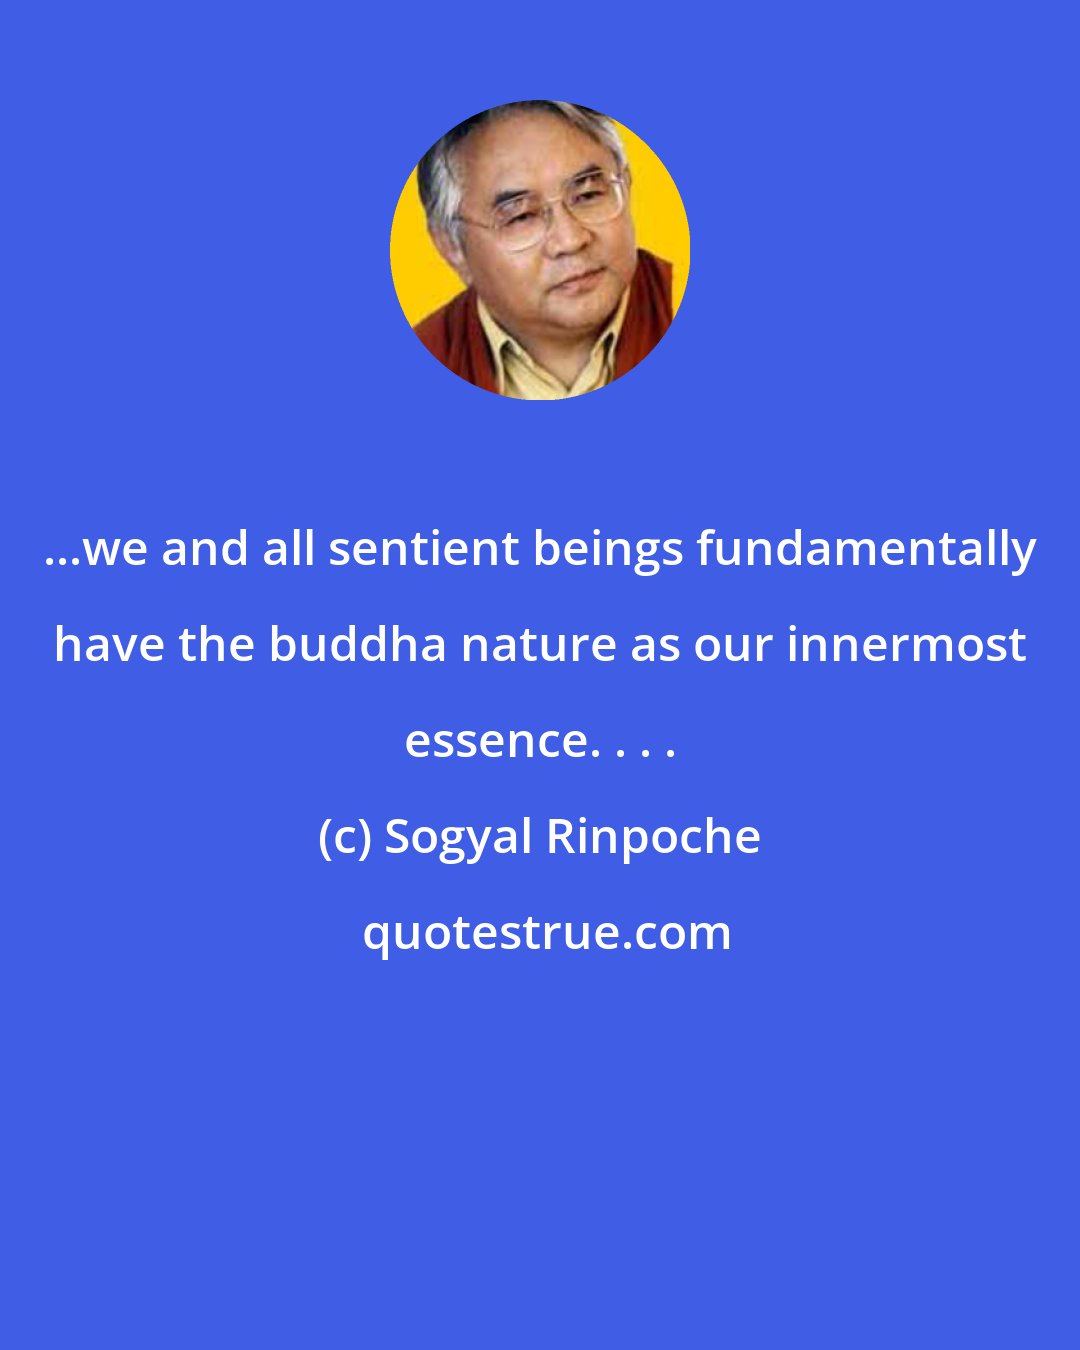 Sogyal Rinpoche: ...we and all sentient beings fundamentally have the buddha nature as our innermost essence. . . .